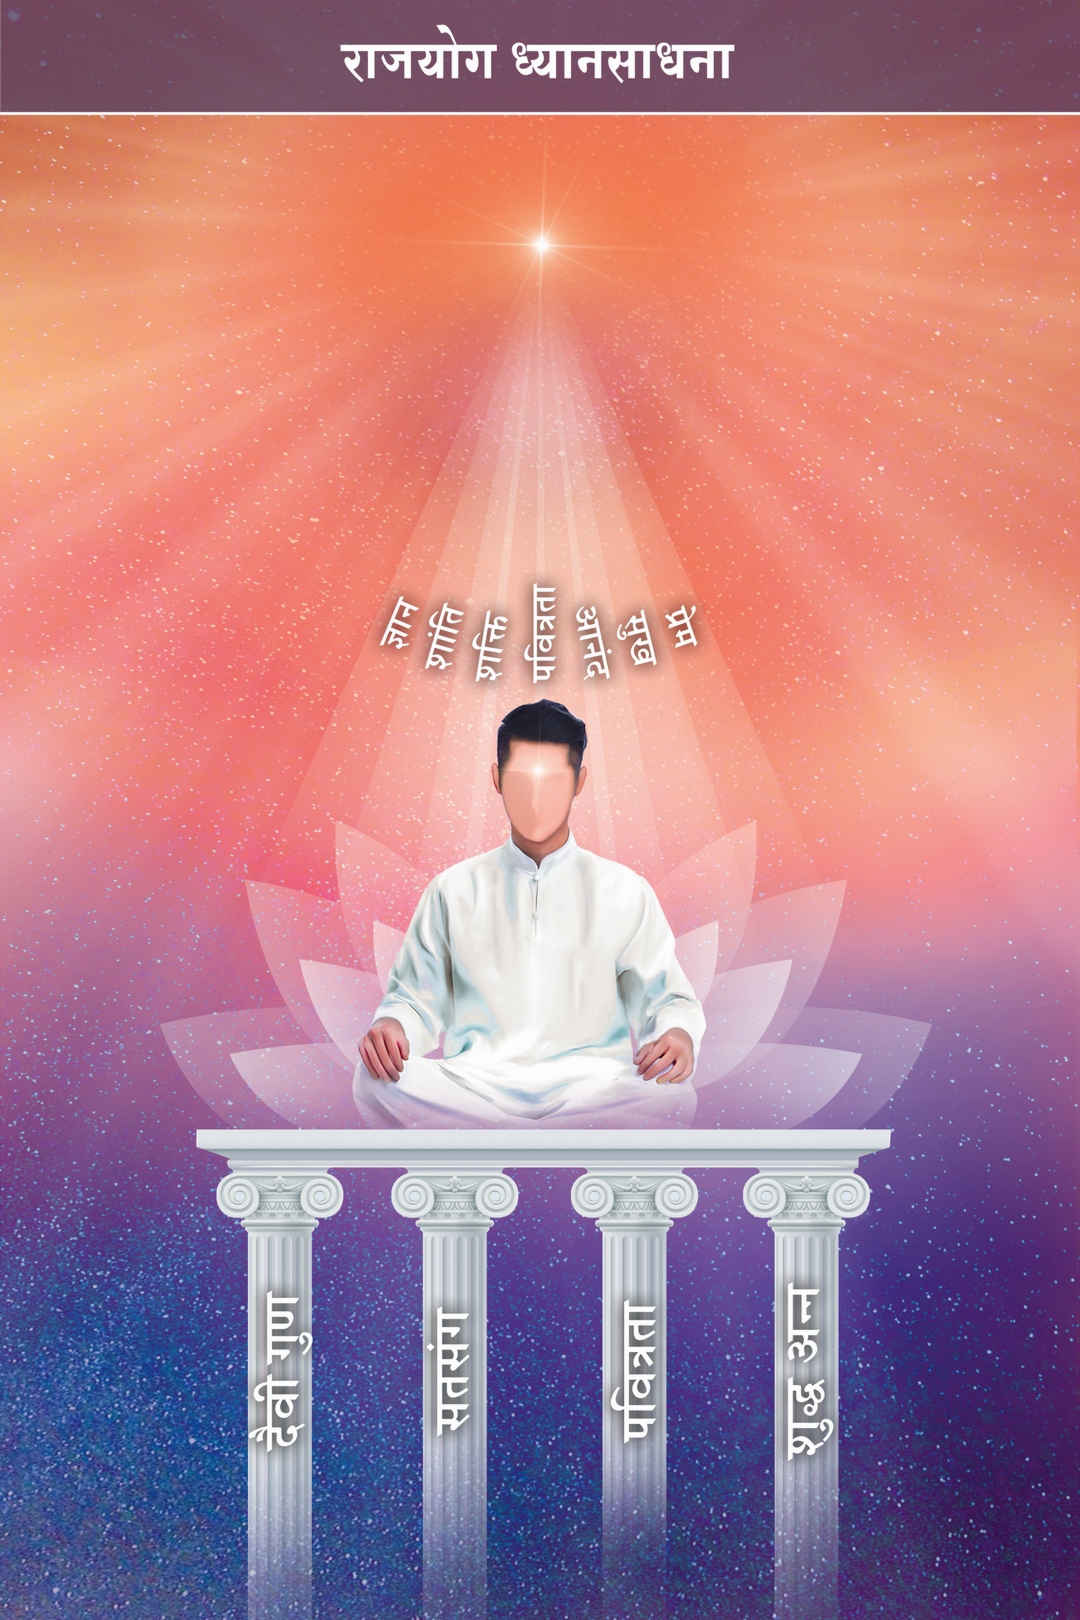 What is rajyoga